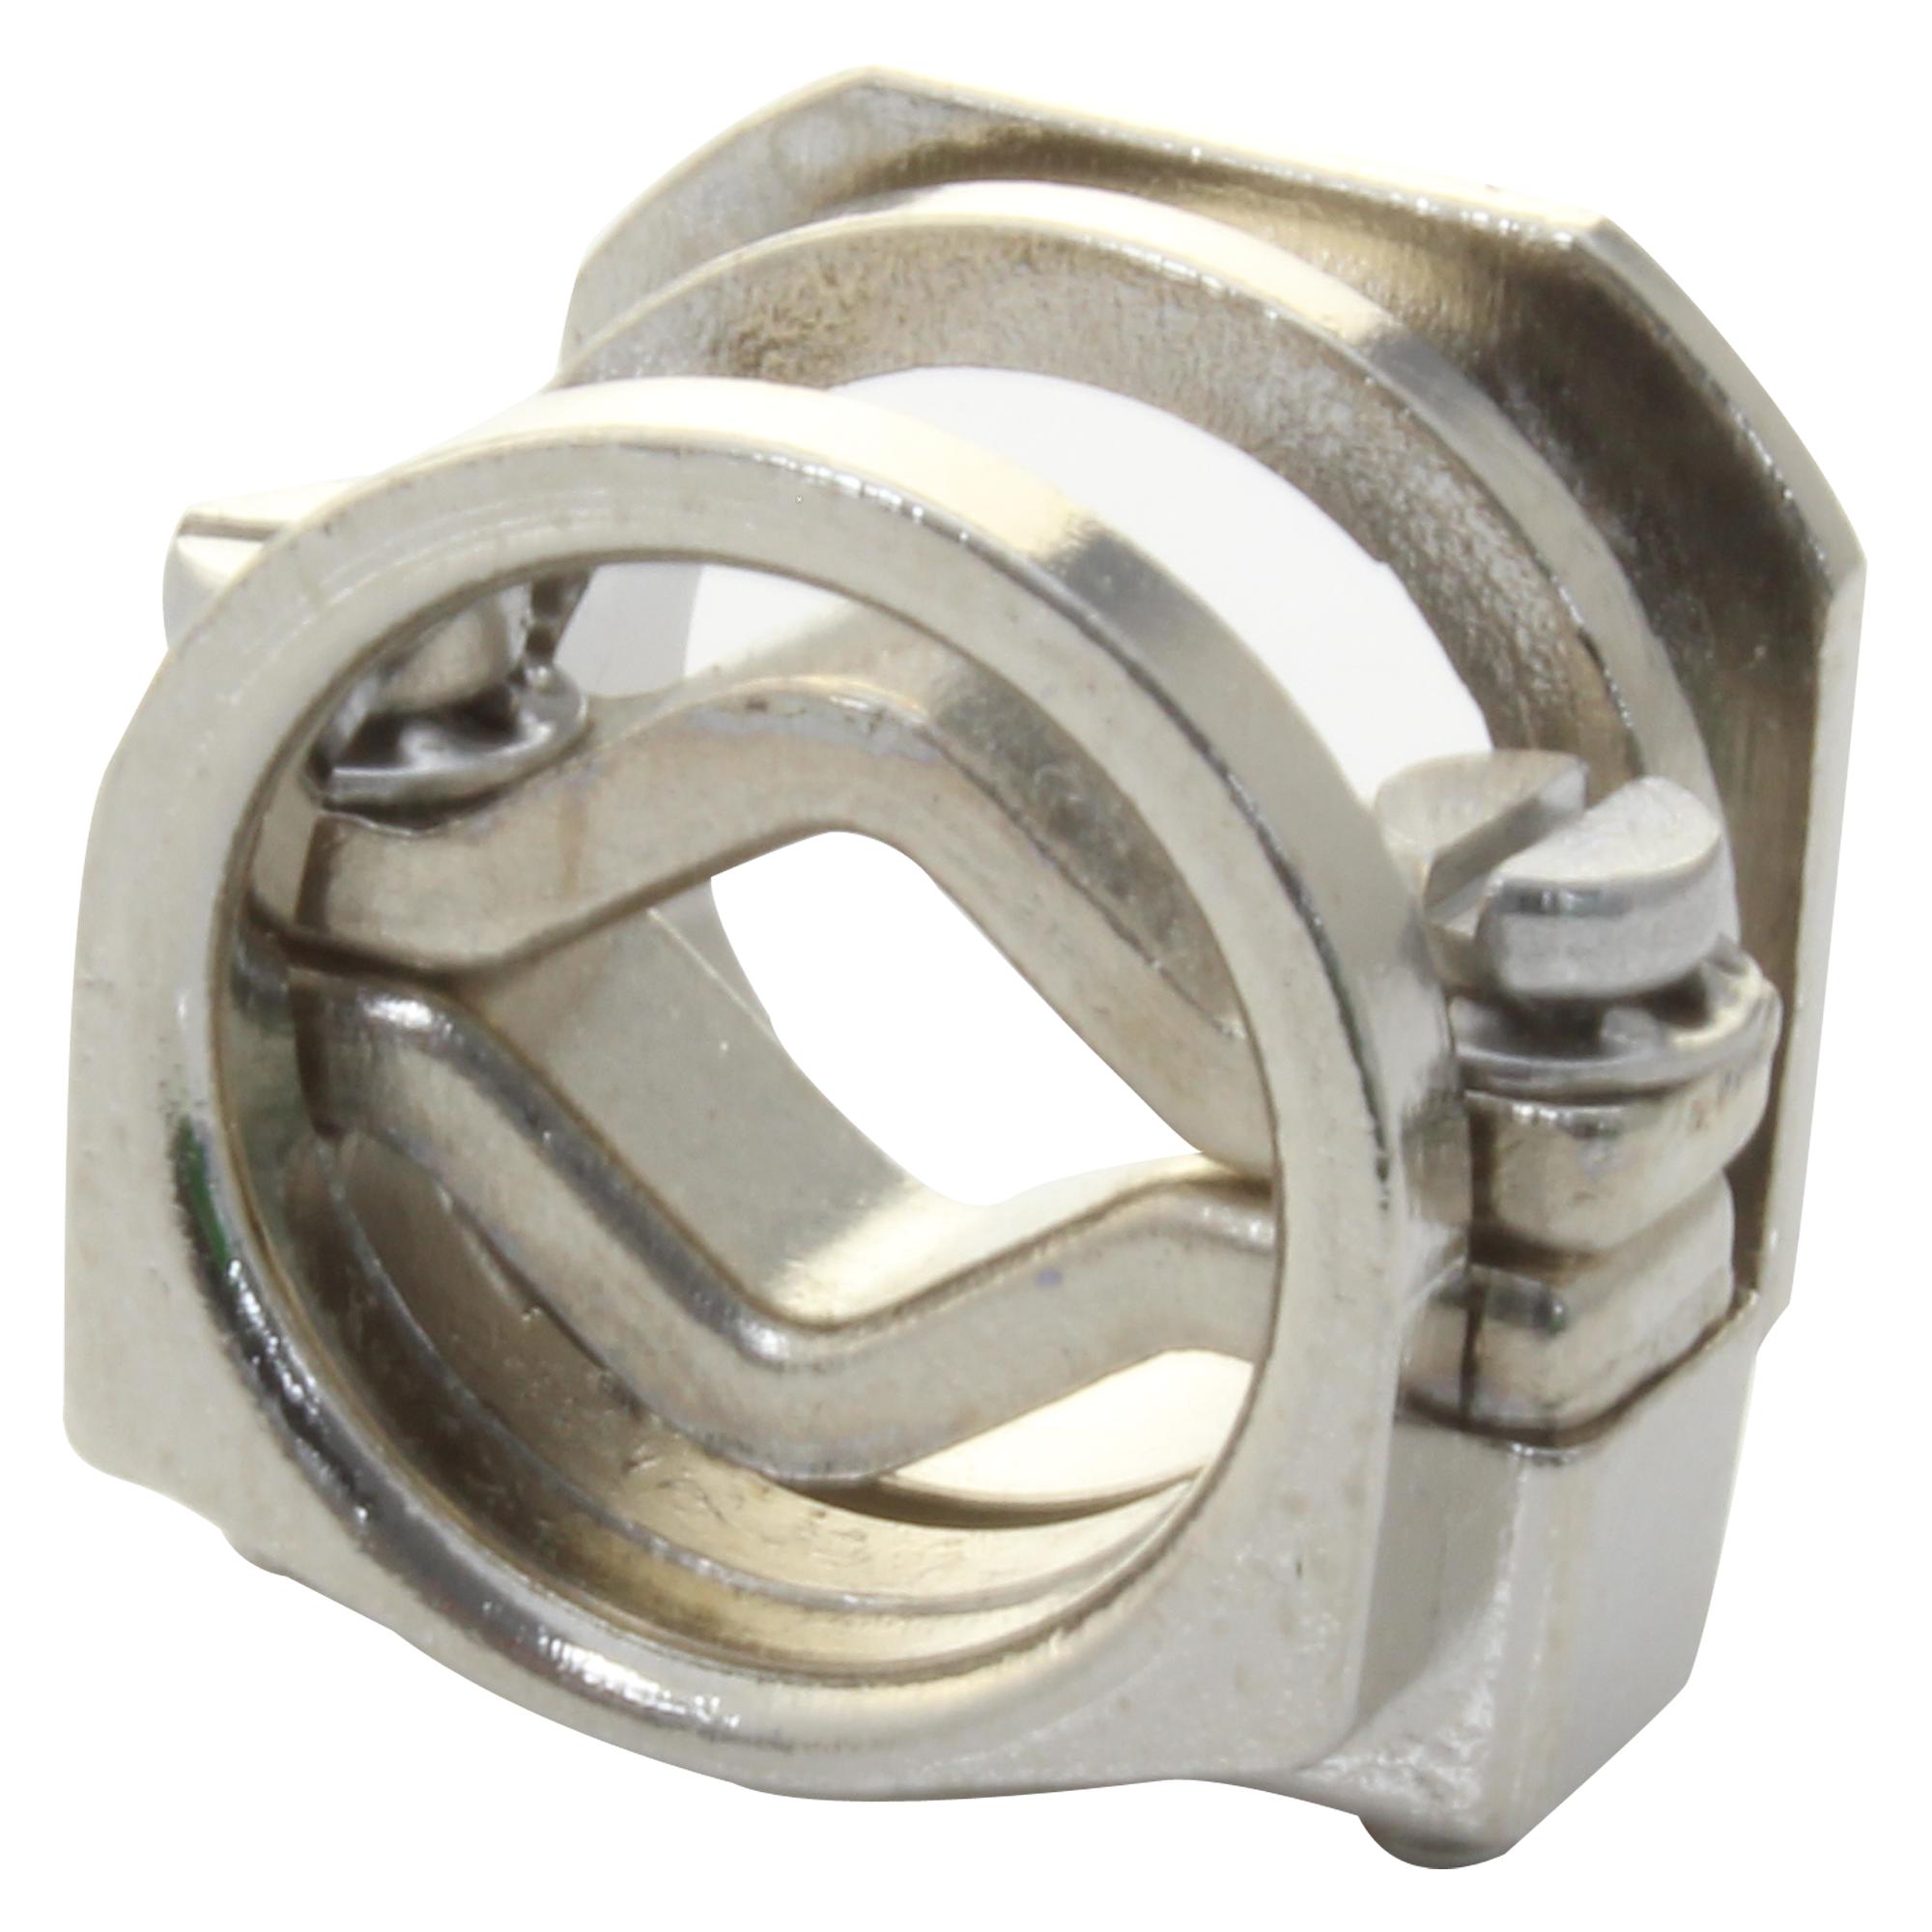 532960006 CABLE CLAMP, 7MM, CIRCULAR CONNECTOR JAEGER